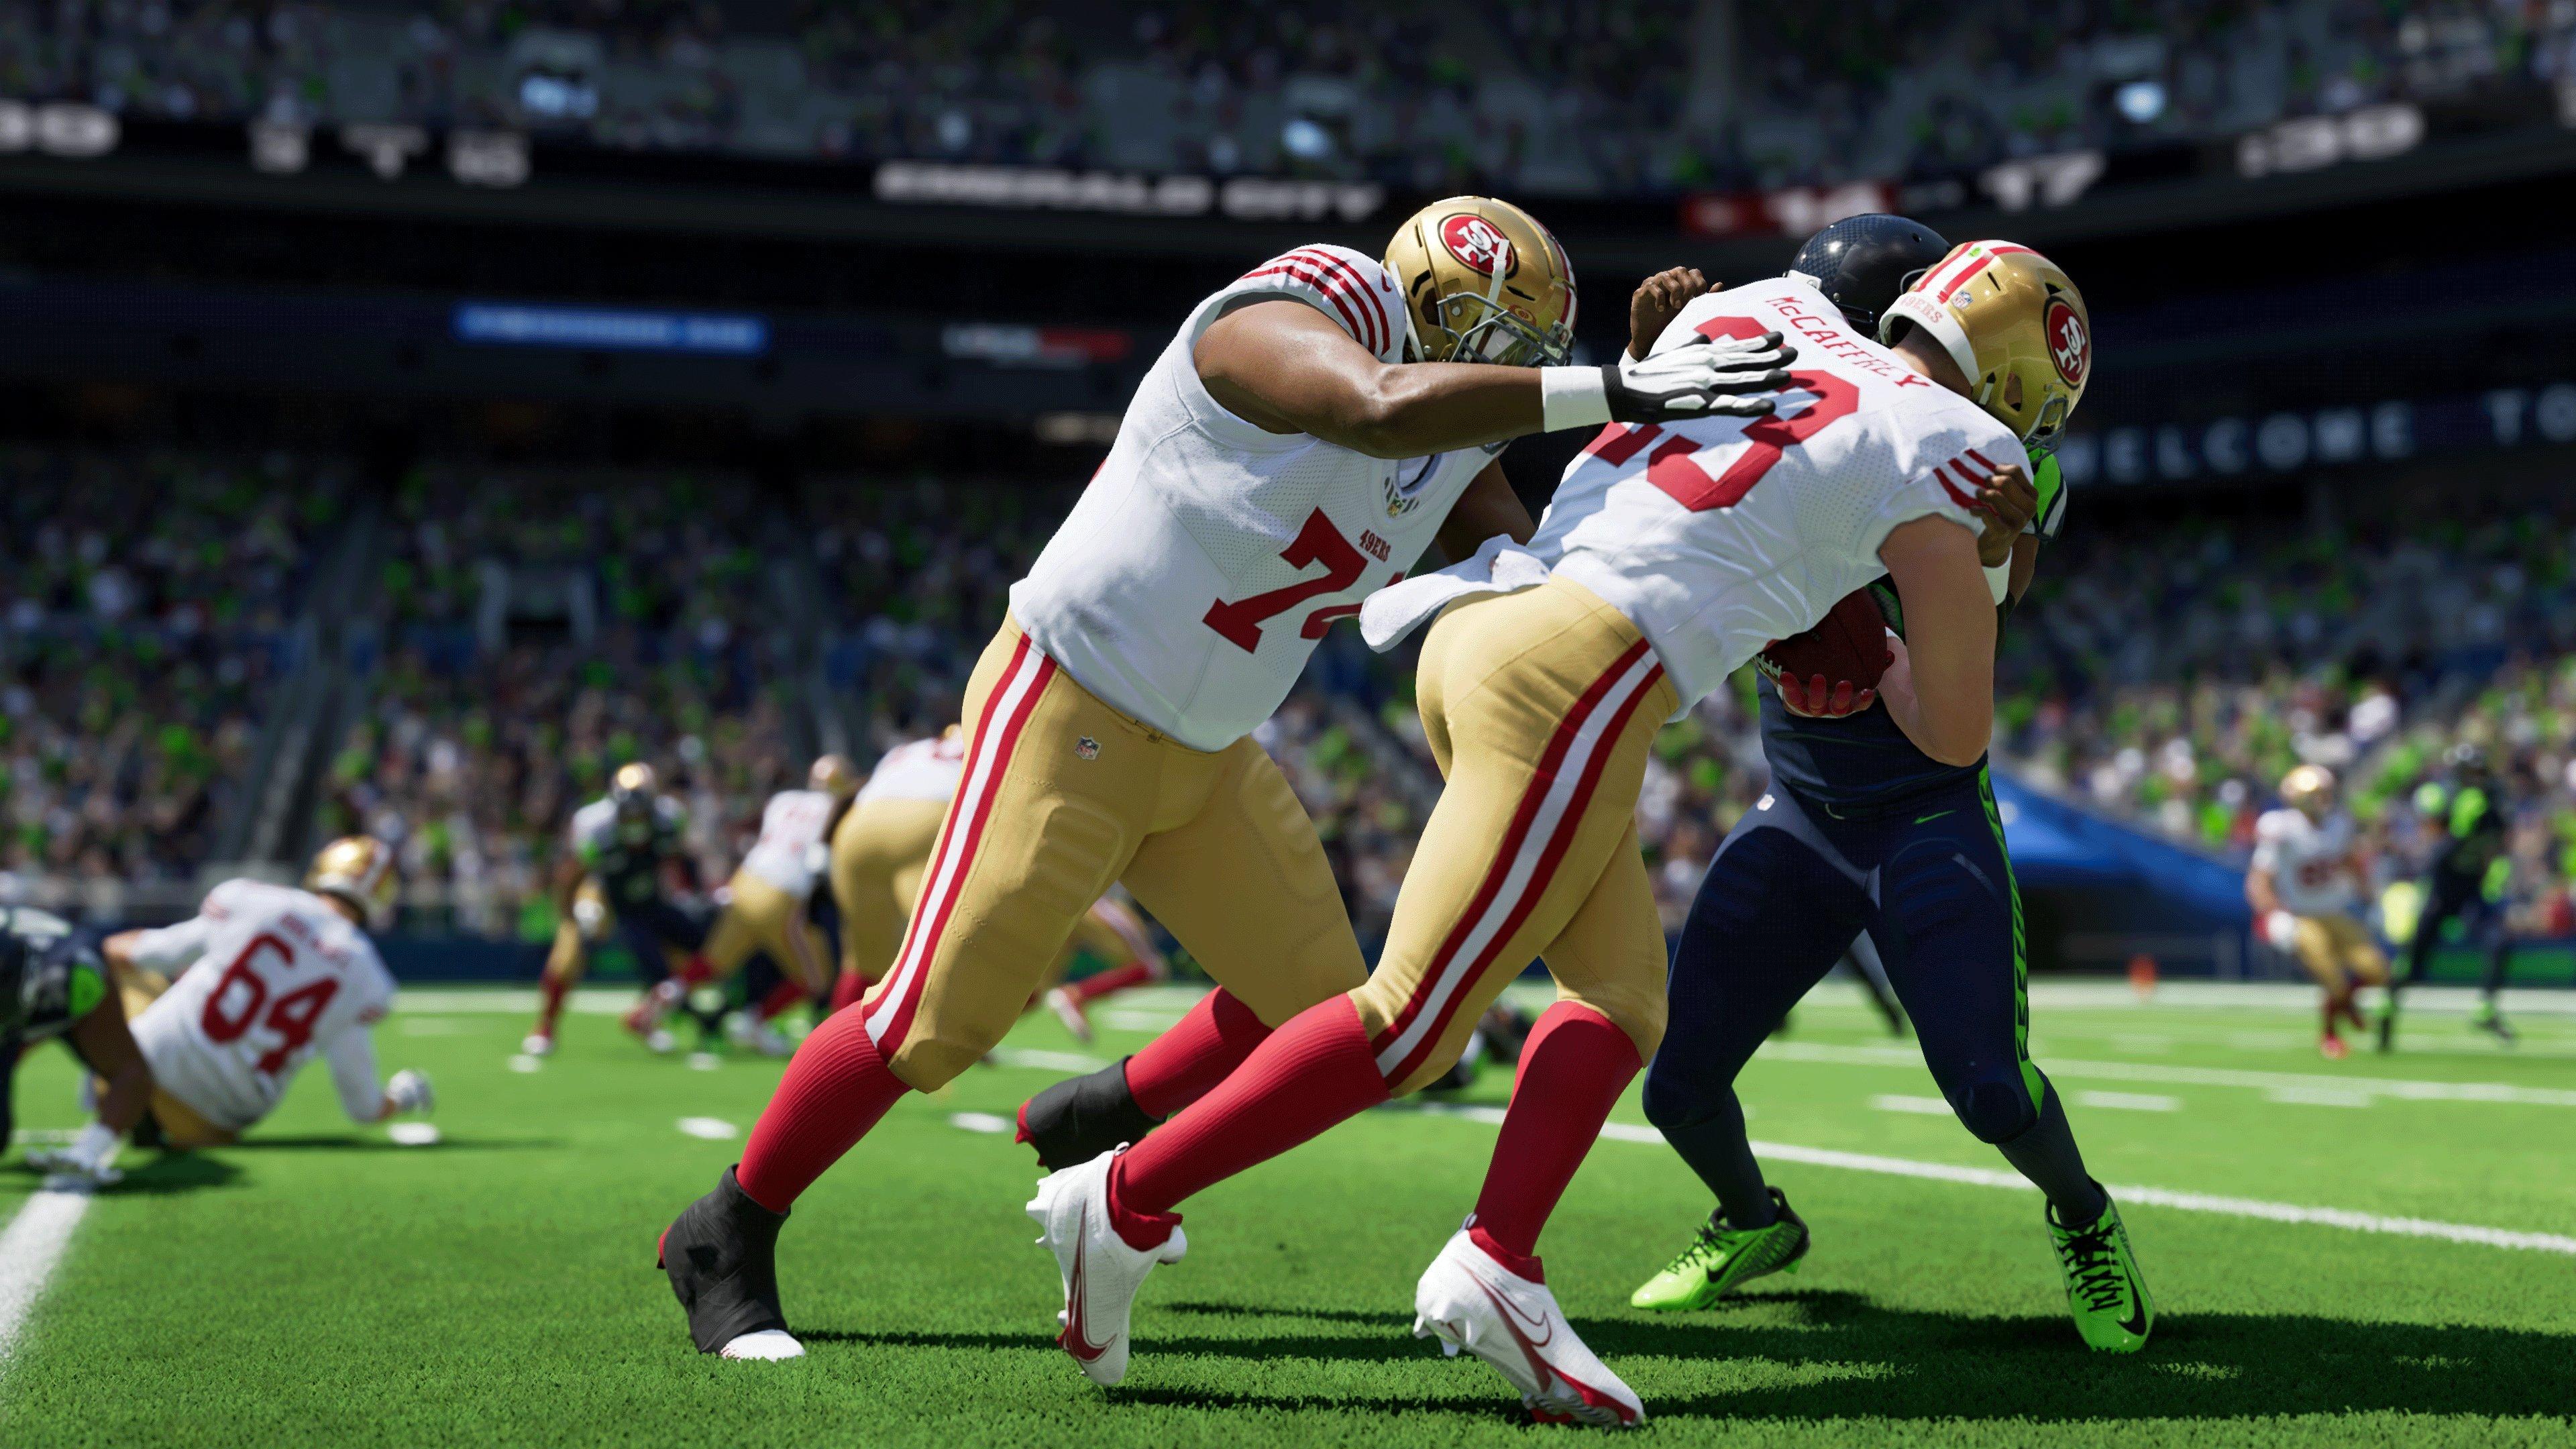 Madden NFL 23 gameplay changes, cover photo, pre-order details and